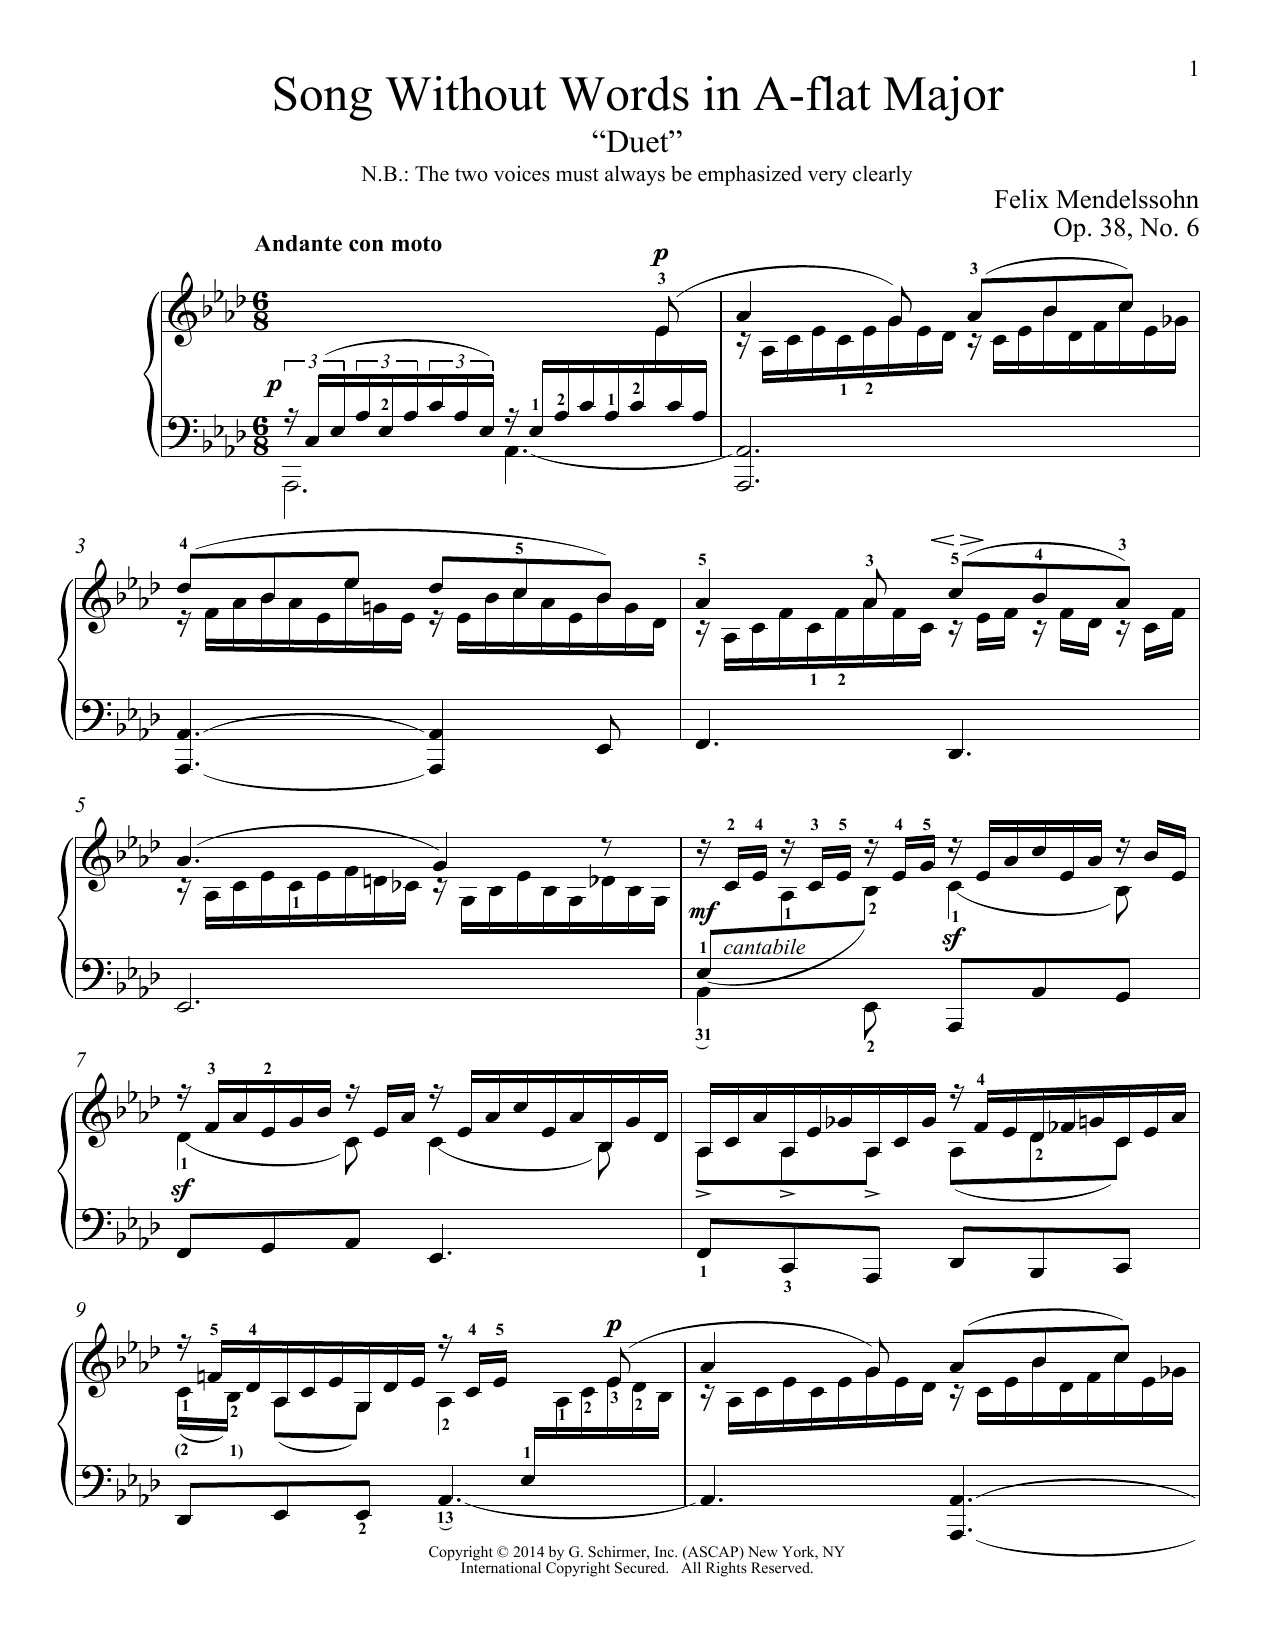 Download Felix Mendelssohn Song Without Words In A-Flat Major, 